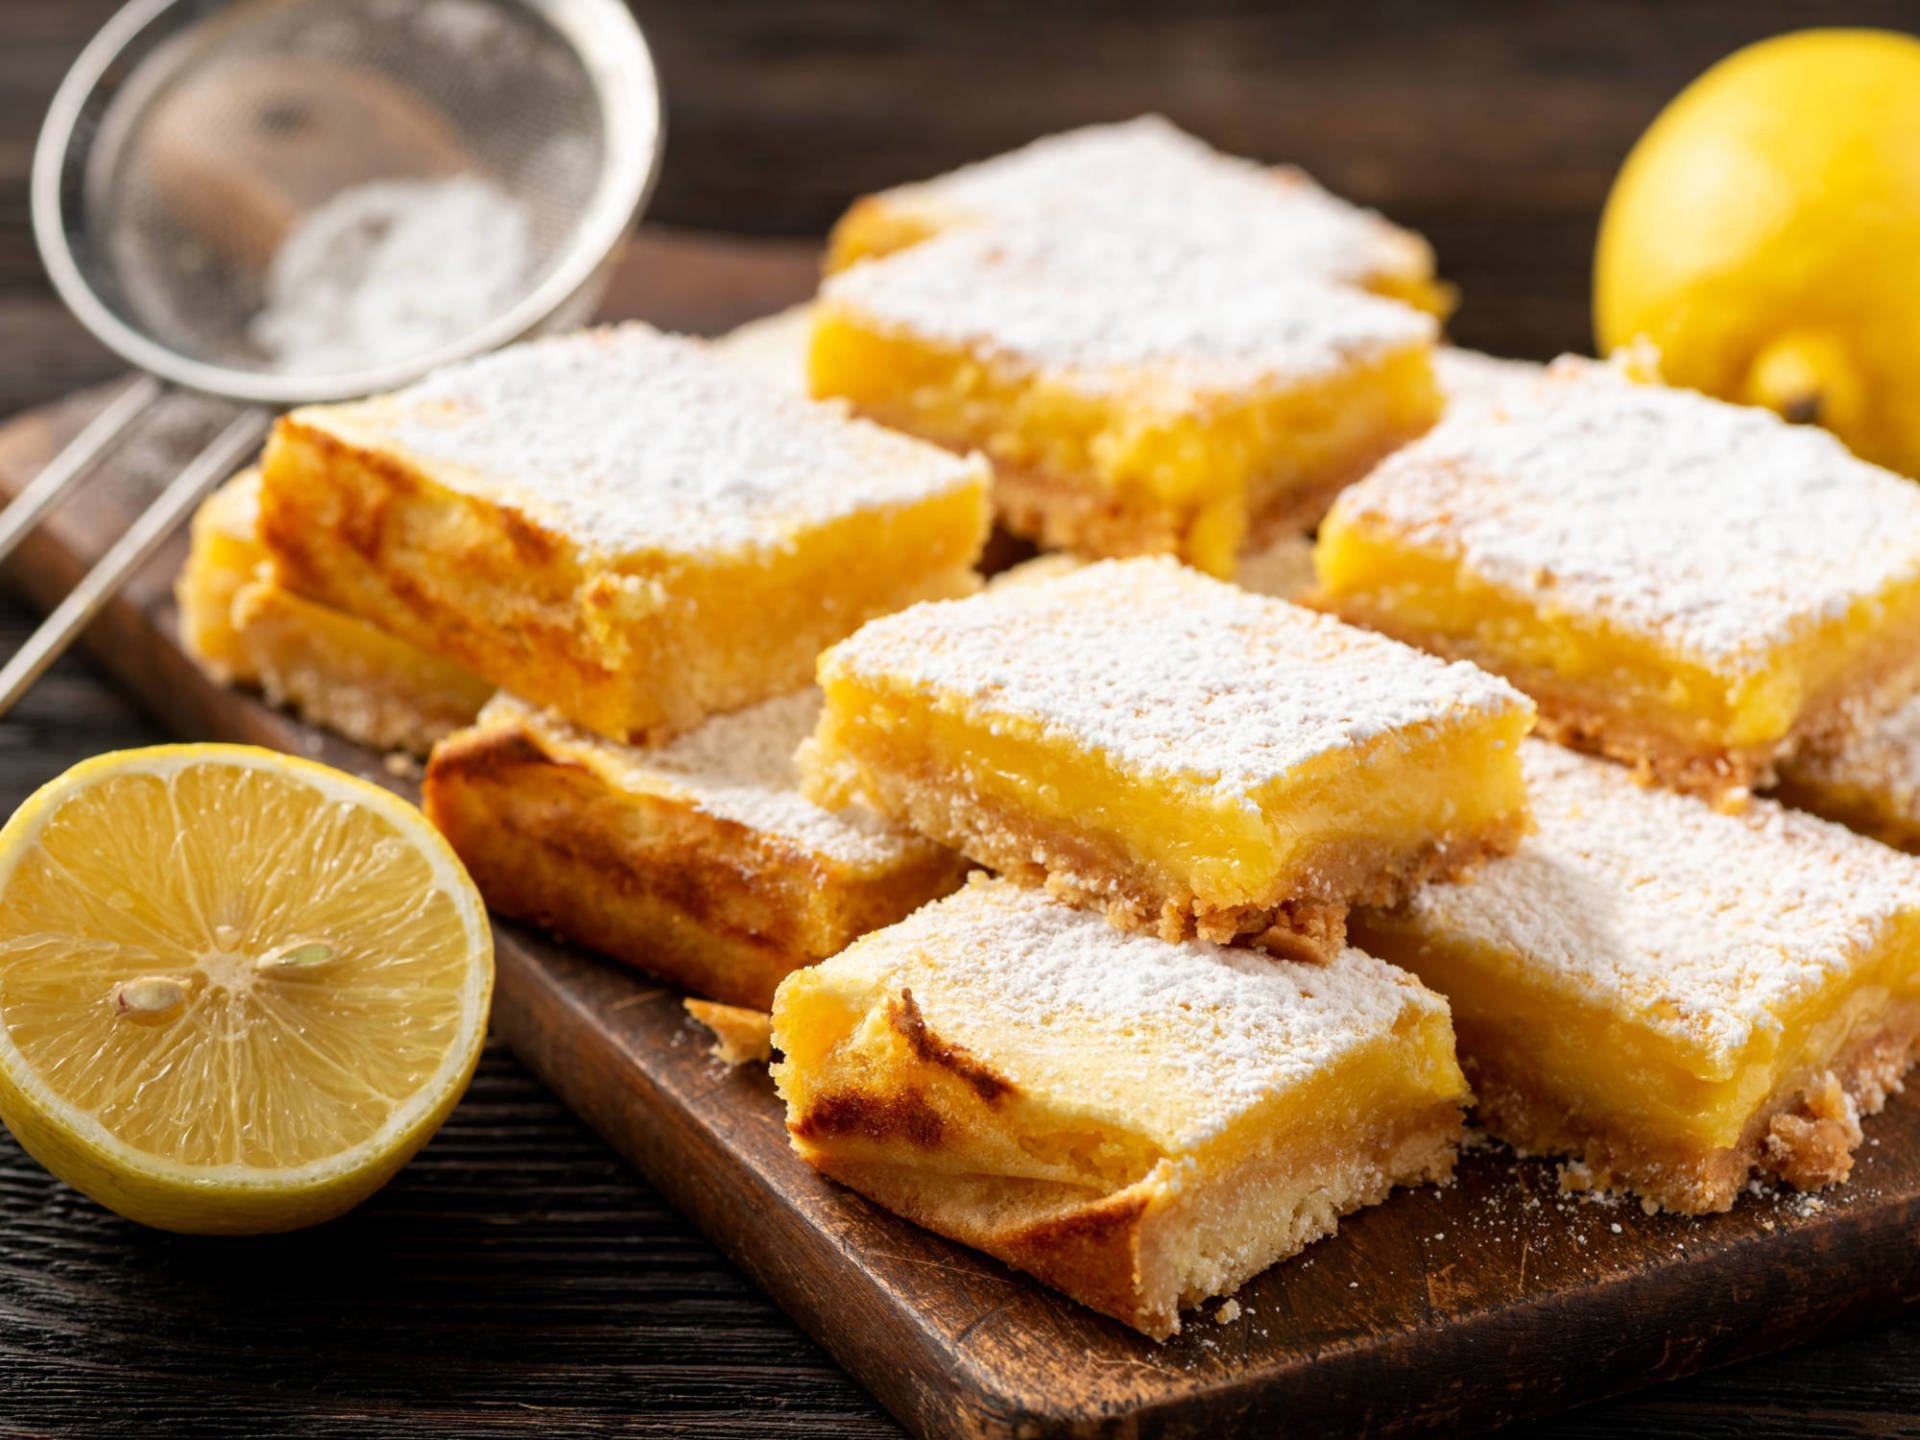 Homemade Lemon Bars With Shortbread Crust, On Wooden Background.